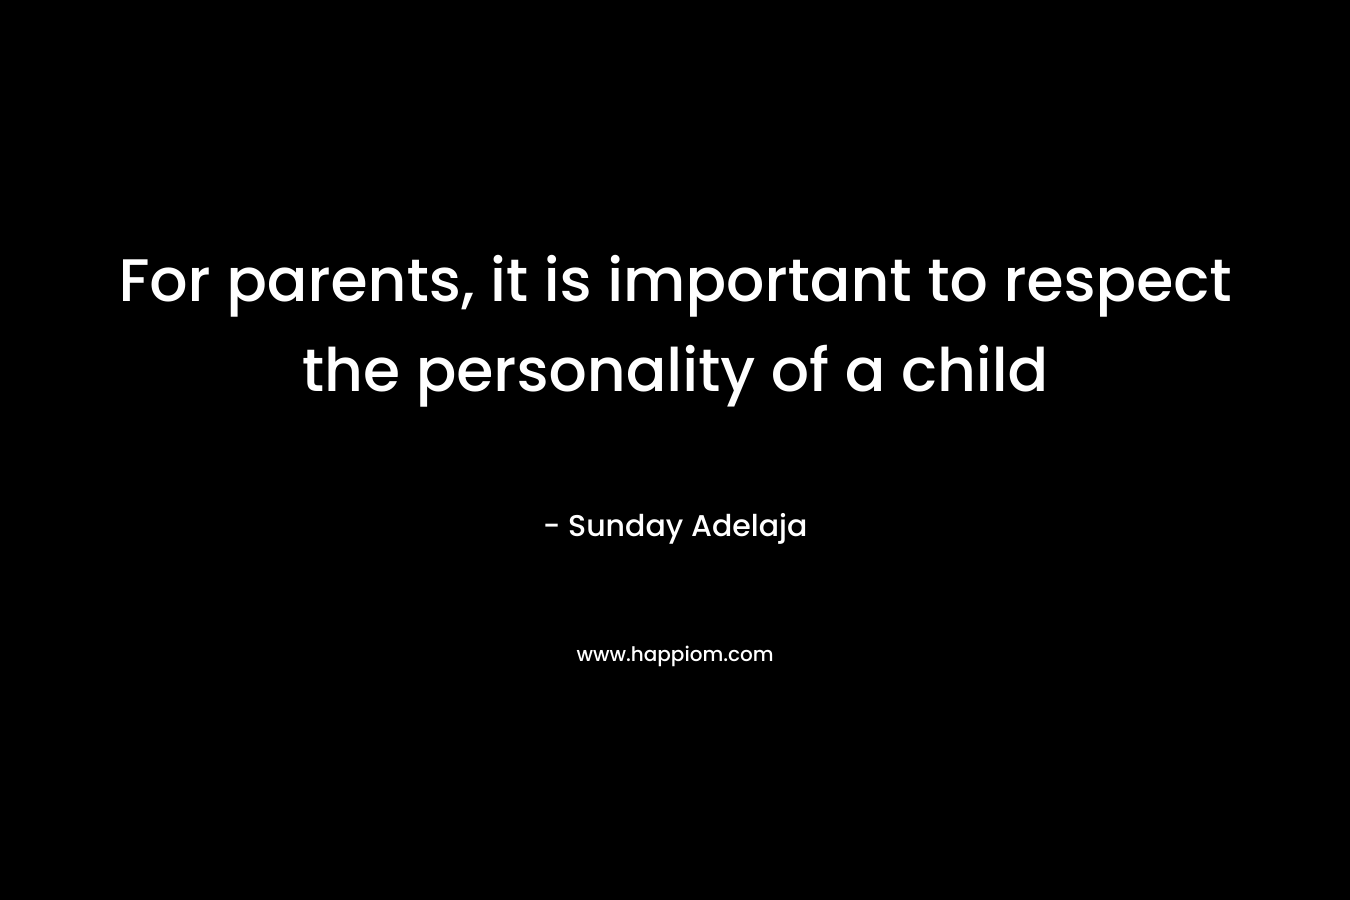 For parents, it is important to respect the personality of a child